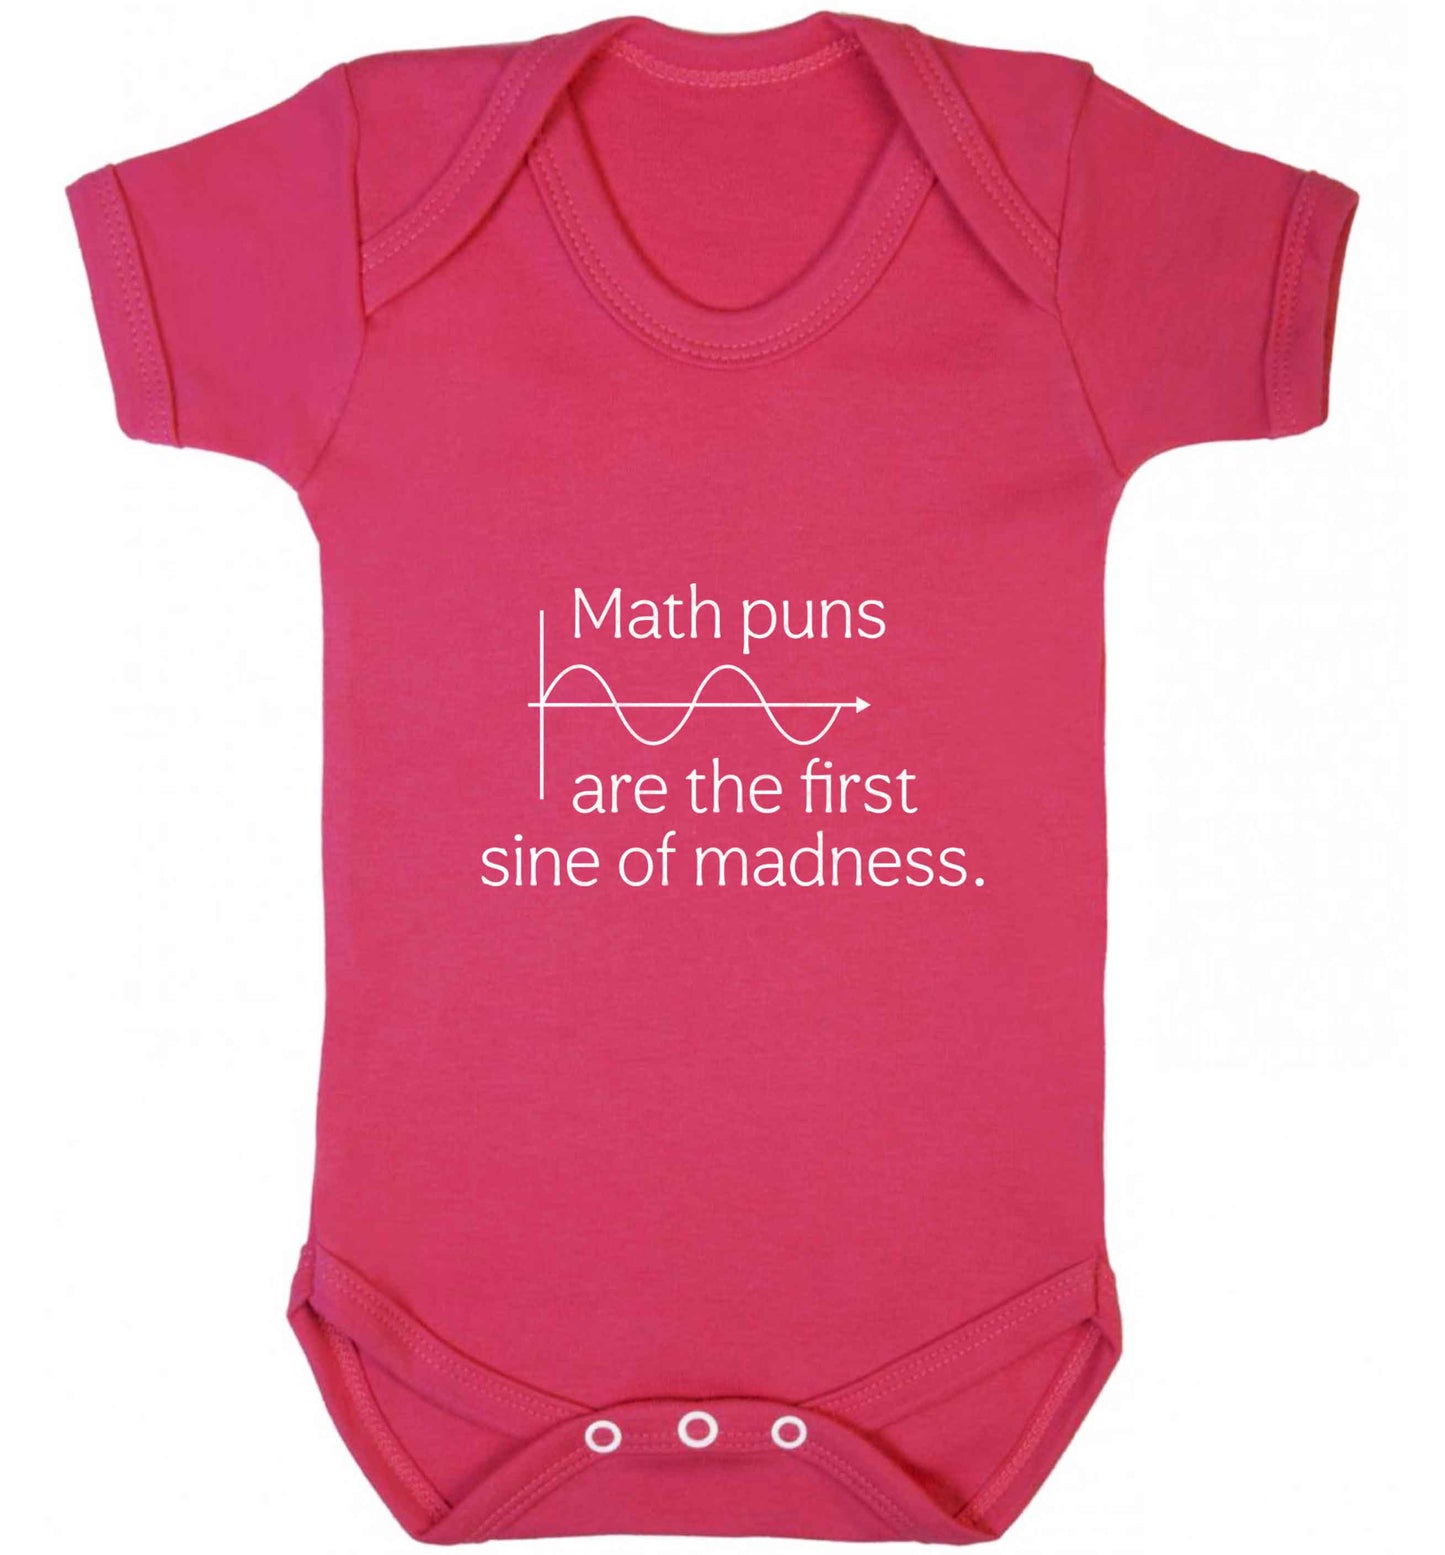 Math puns are the first sine of madness baby vest dark pink 18-24 months